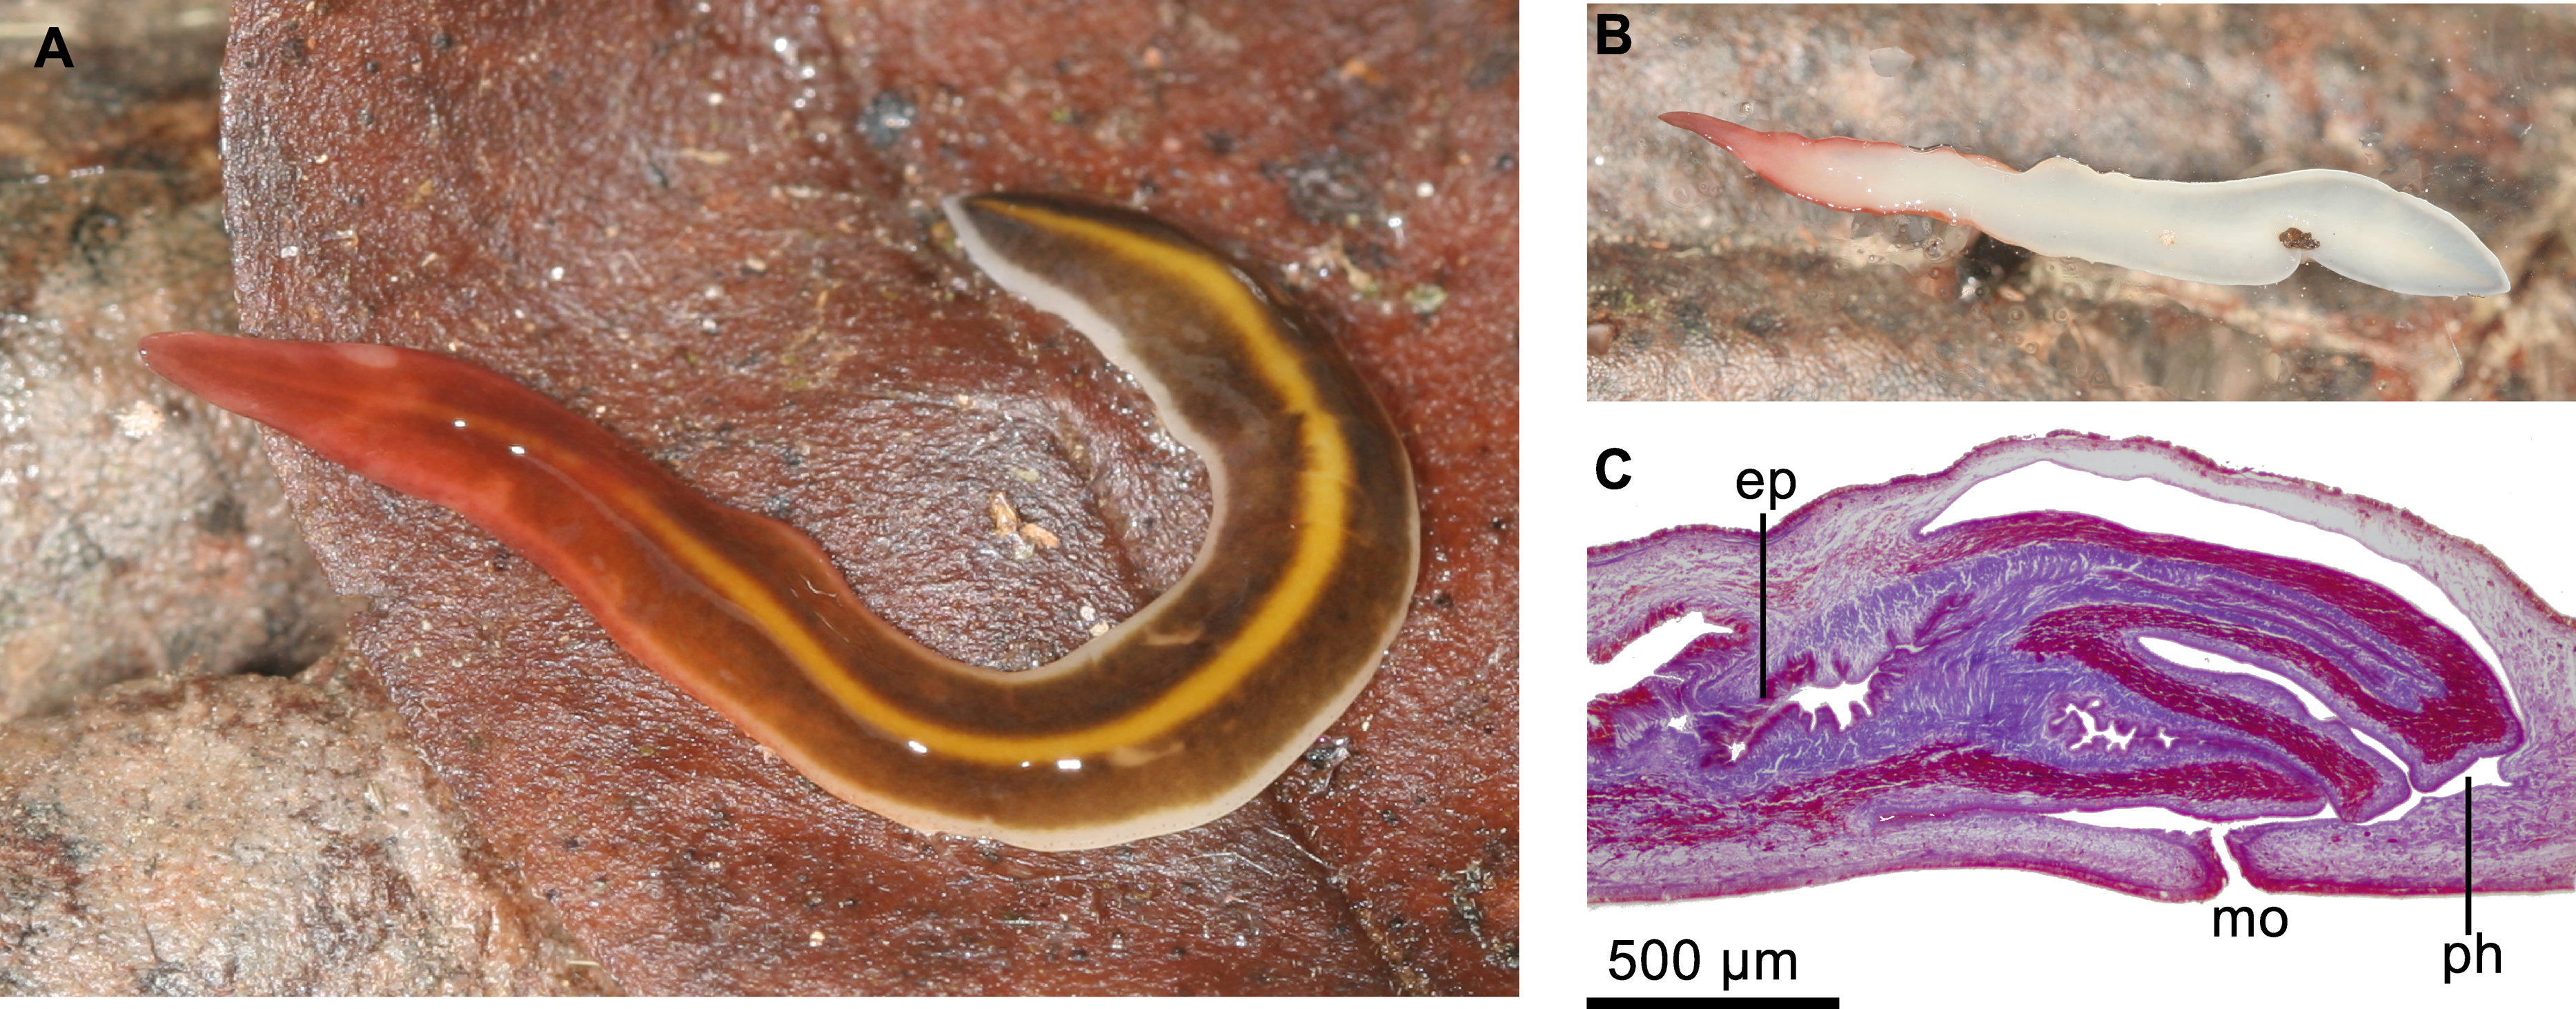 Five new pseudocryptic land planarian species of Cratera ...